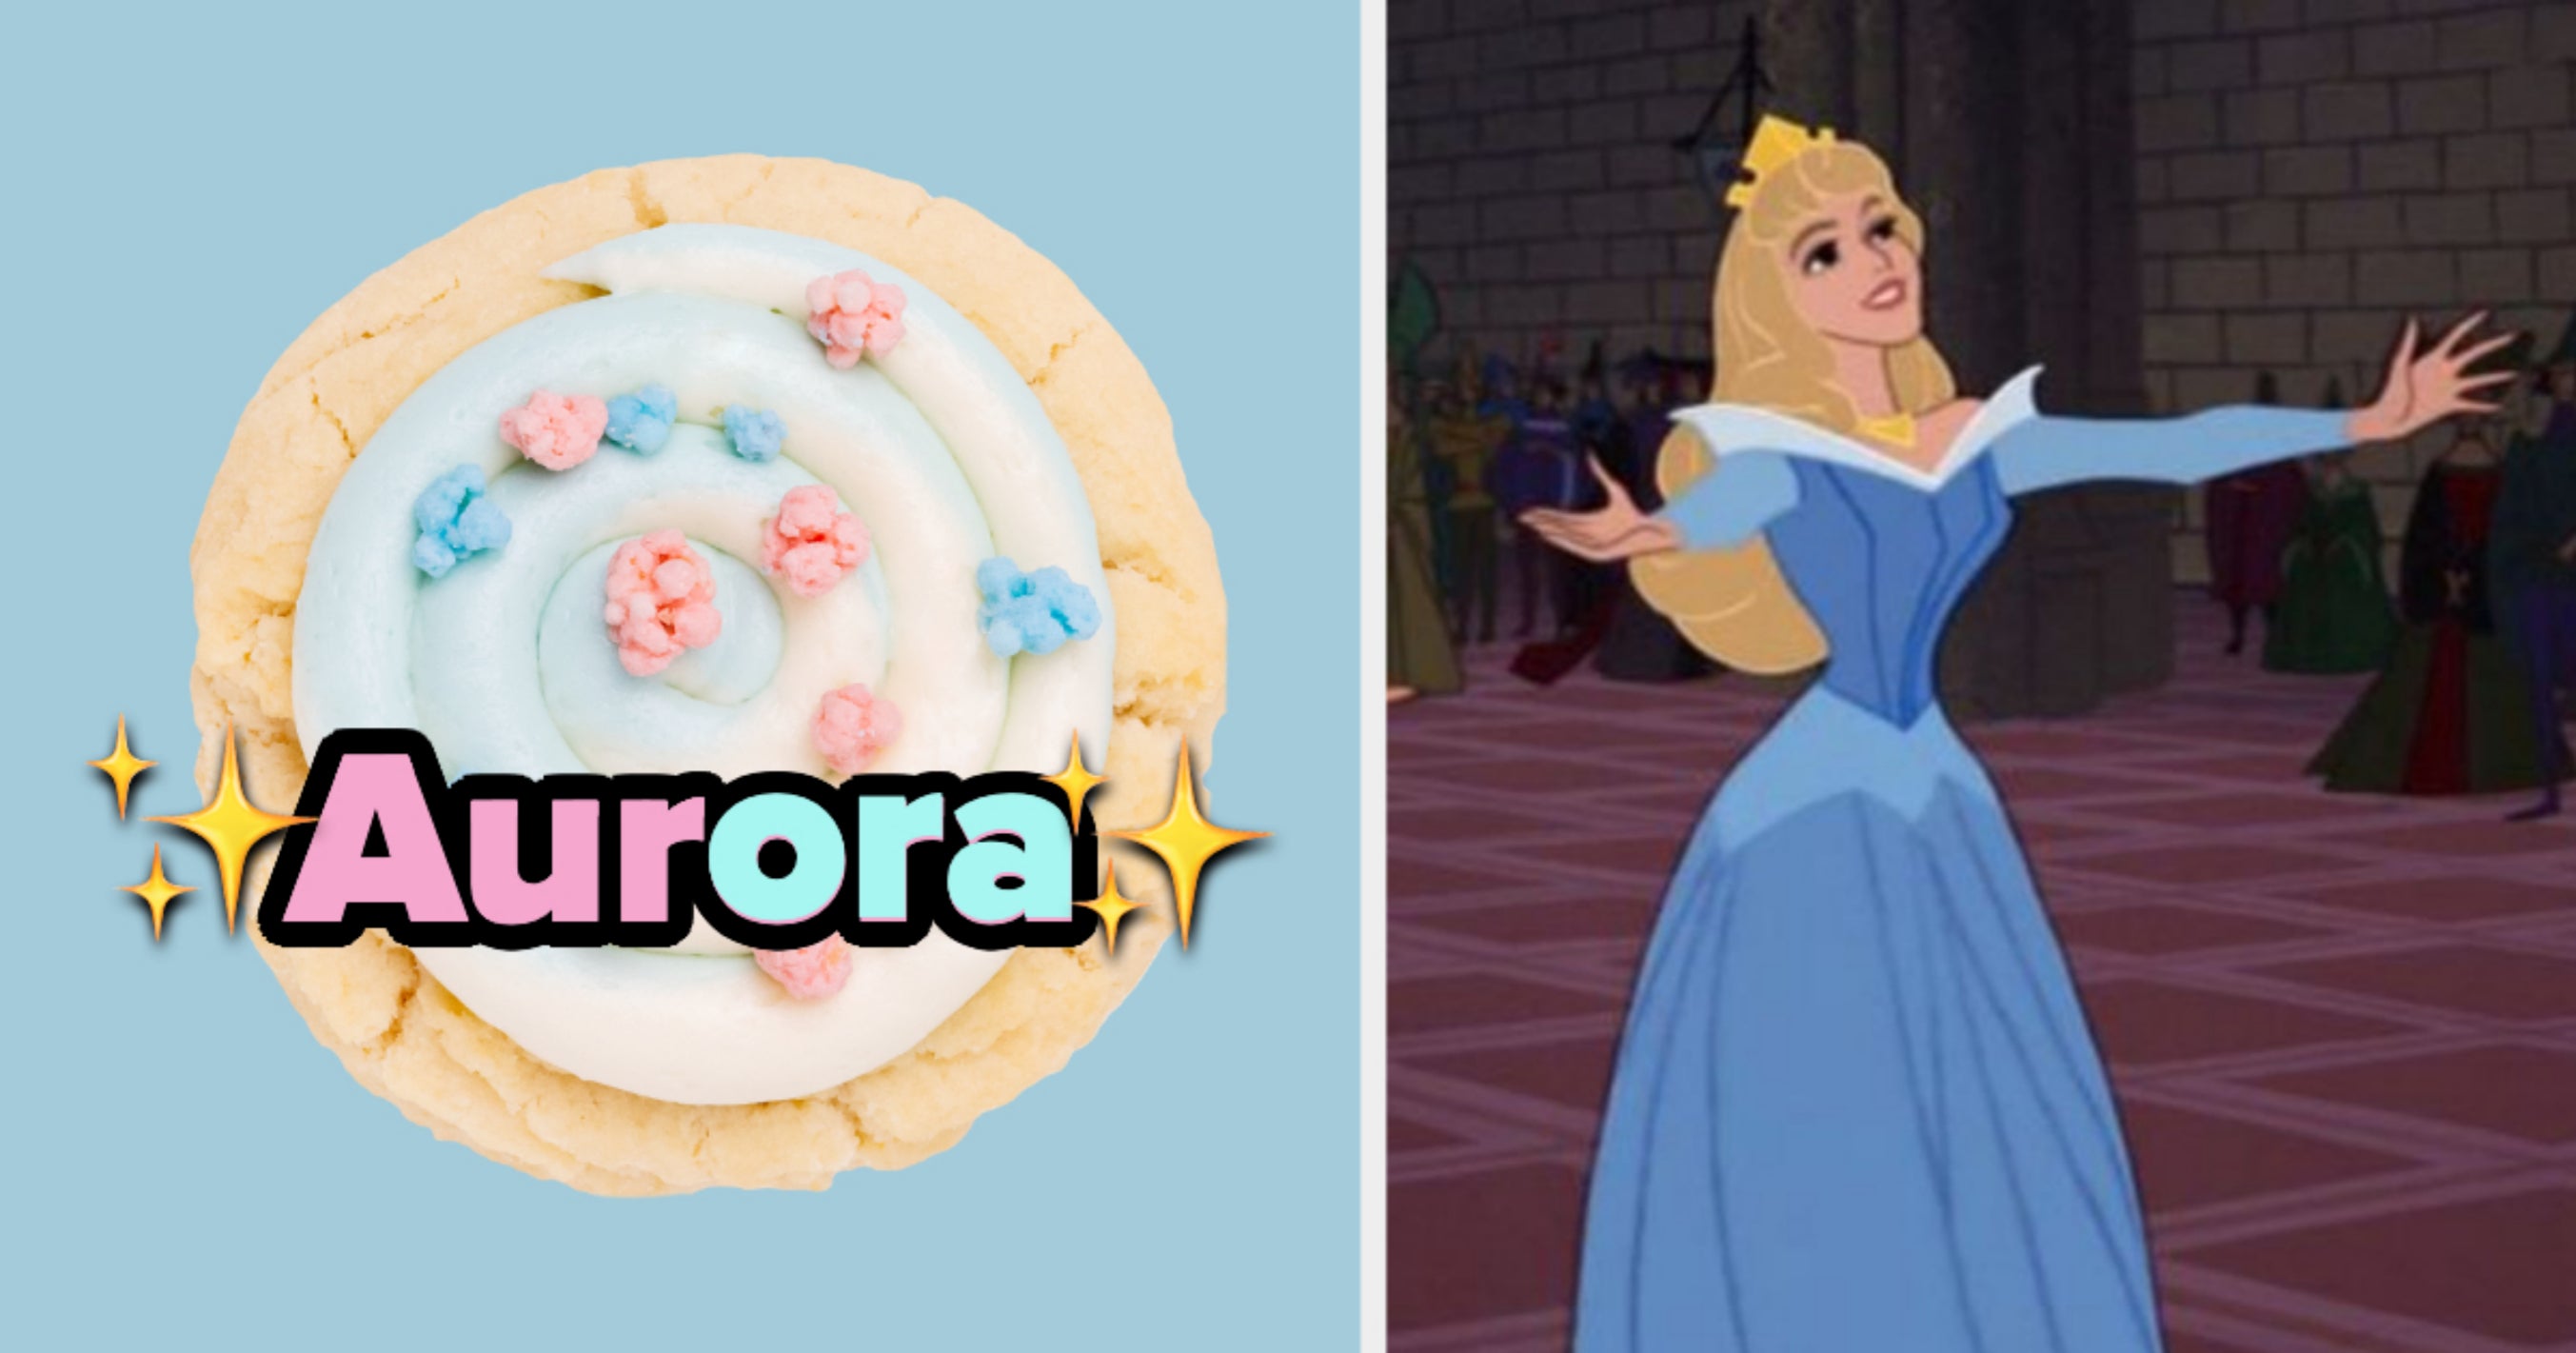 Pick 6 GIANT Crumbl Cookies To Eat And We’ll Tell You Which Princess Matches Your Heart